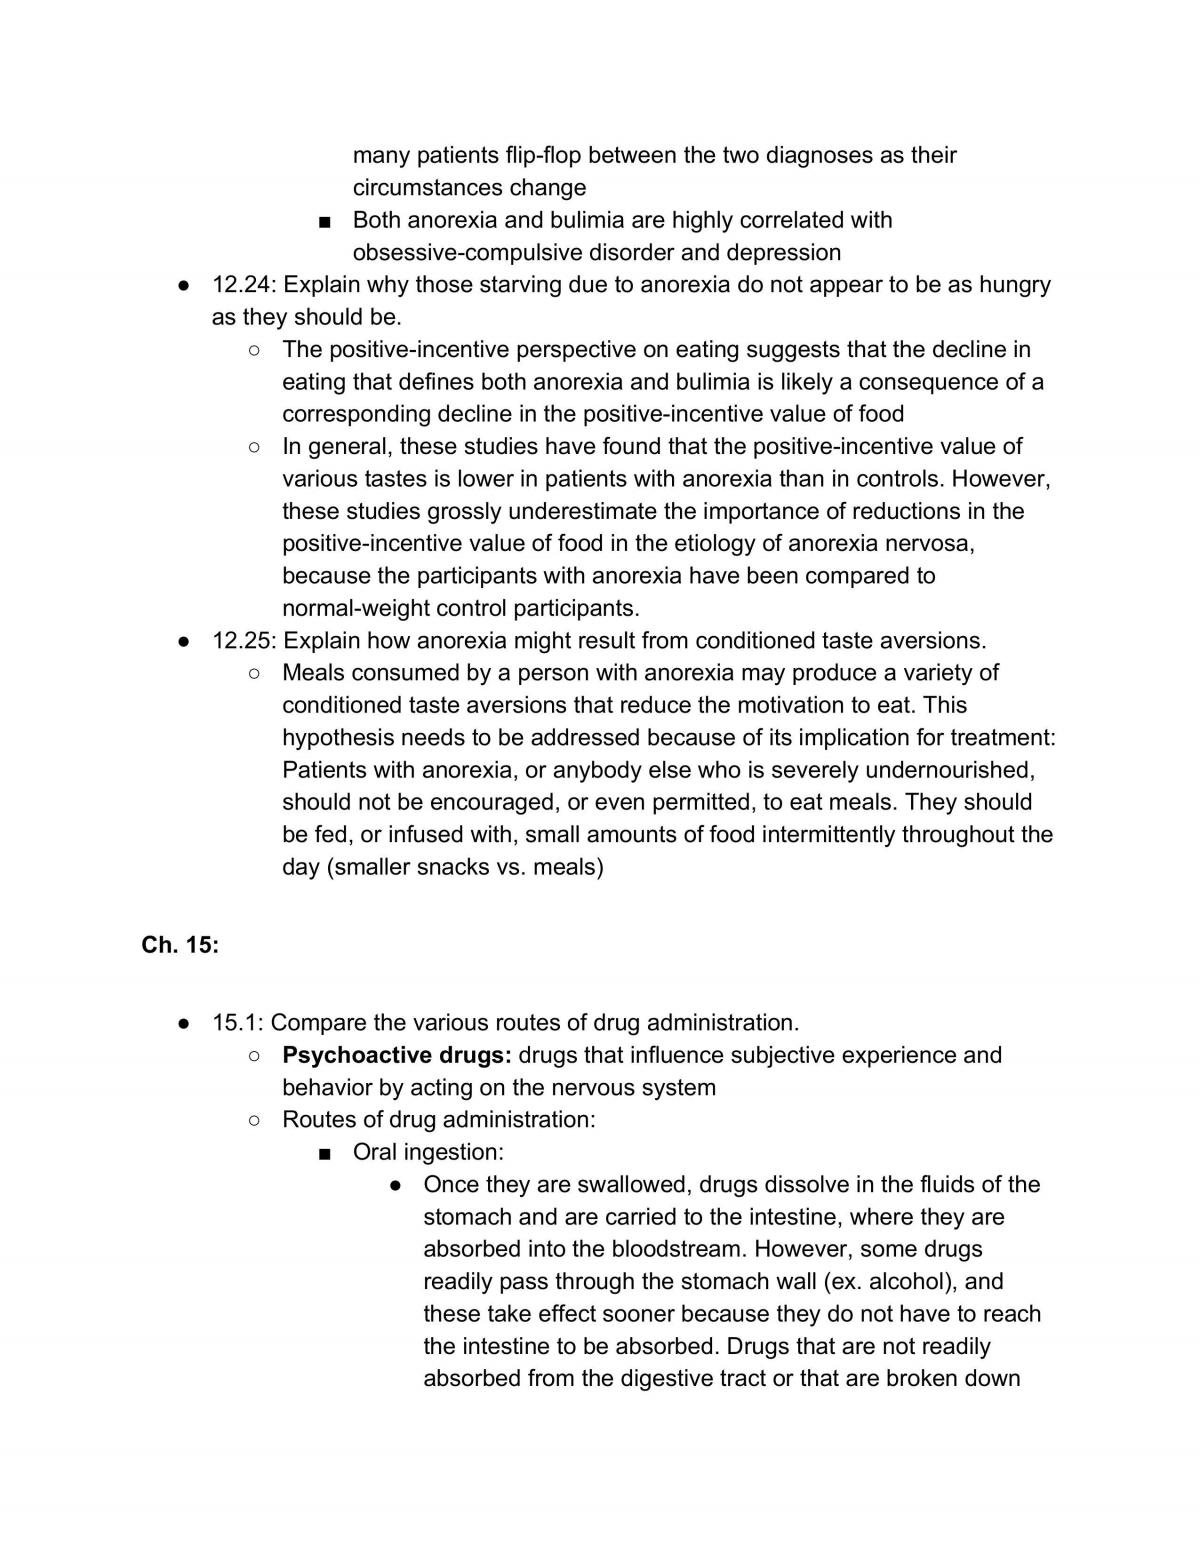 PSYC 304 Brain and Behaviour Notes - Page 147